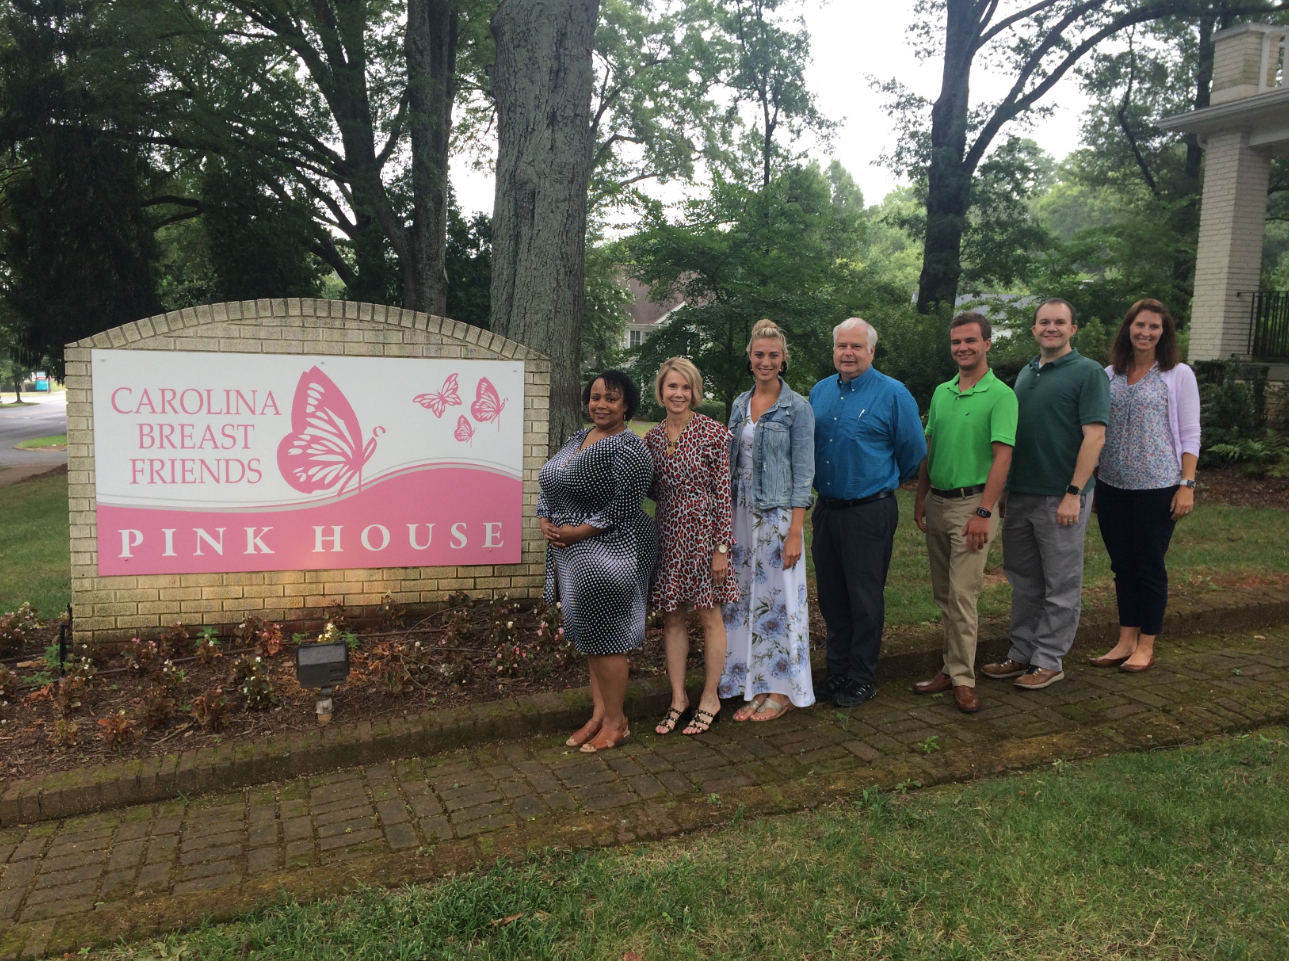 A team of people from Apparo, Rodgers Builders and Carolina Breast Friends posing by the Carolina Breast Friends sign in front of The Pink House.